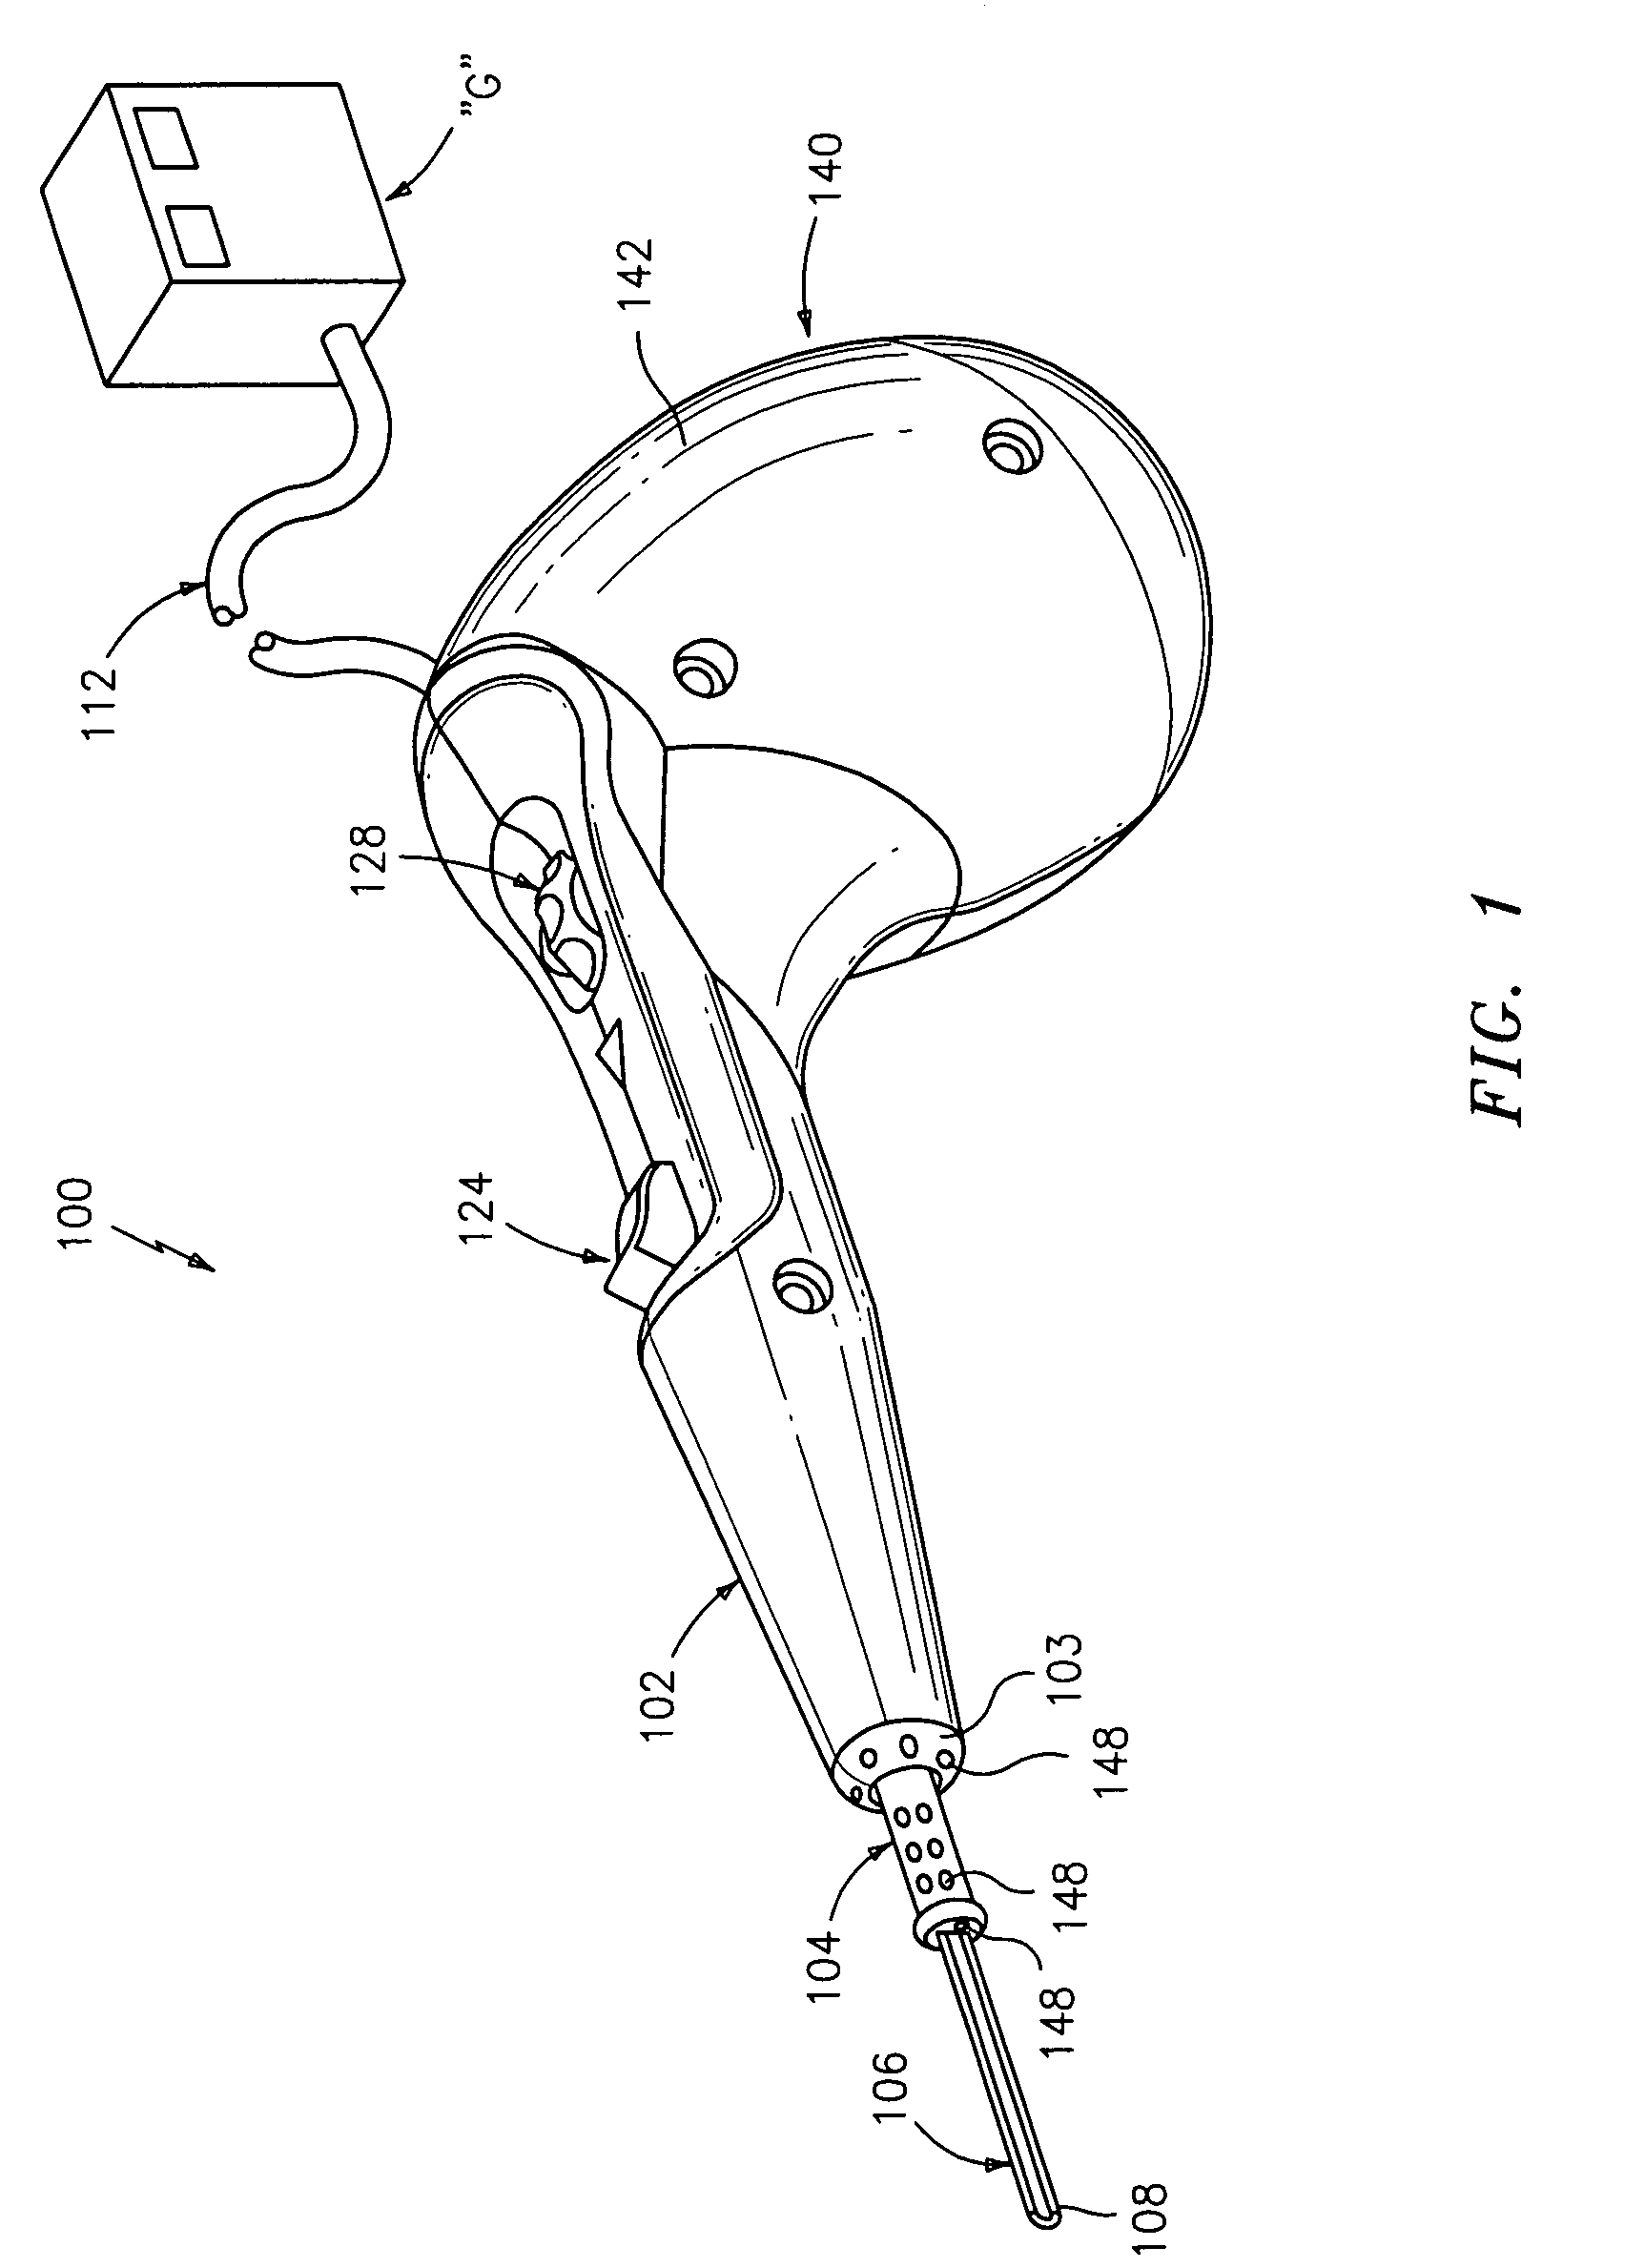 Pistol grip electrosurgical pencil with manual aspirator/irrigator and methods of using the same